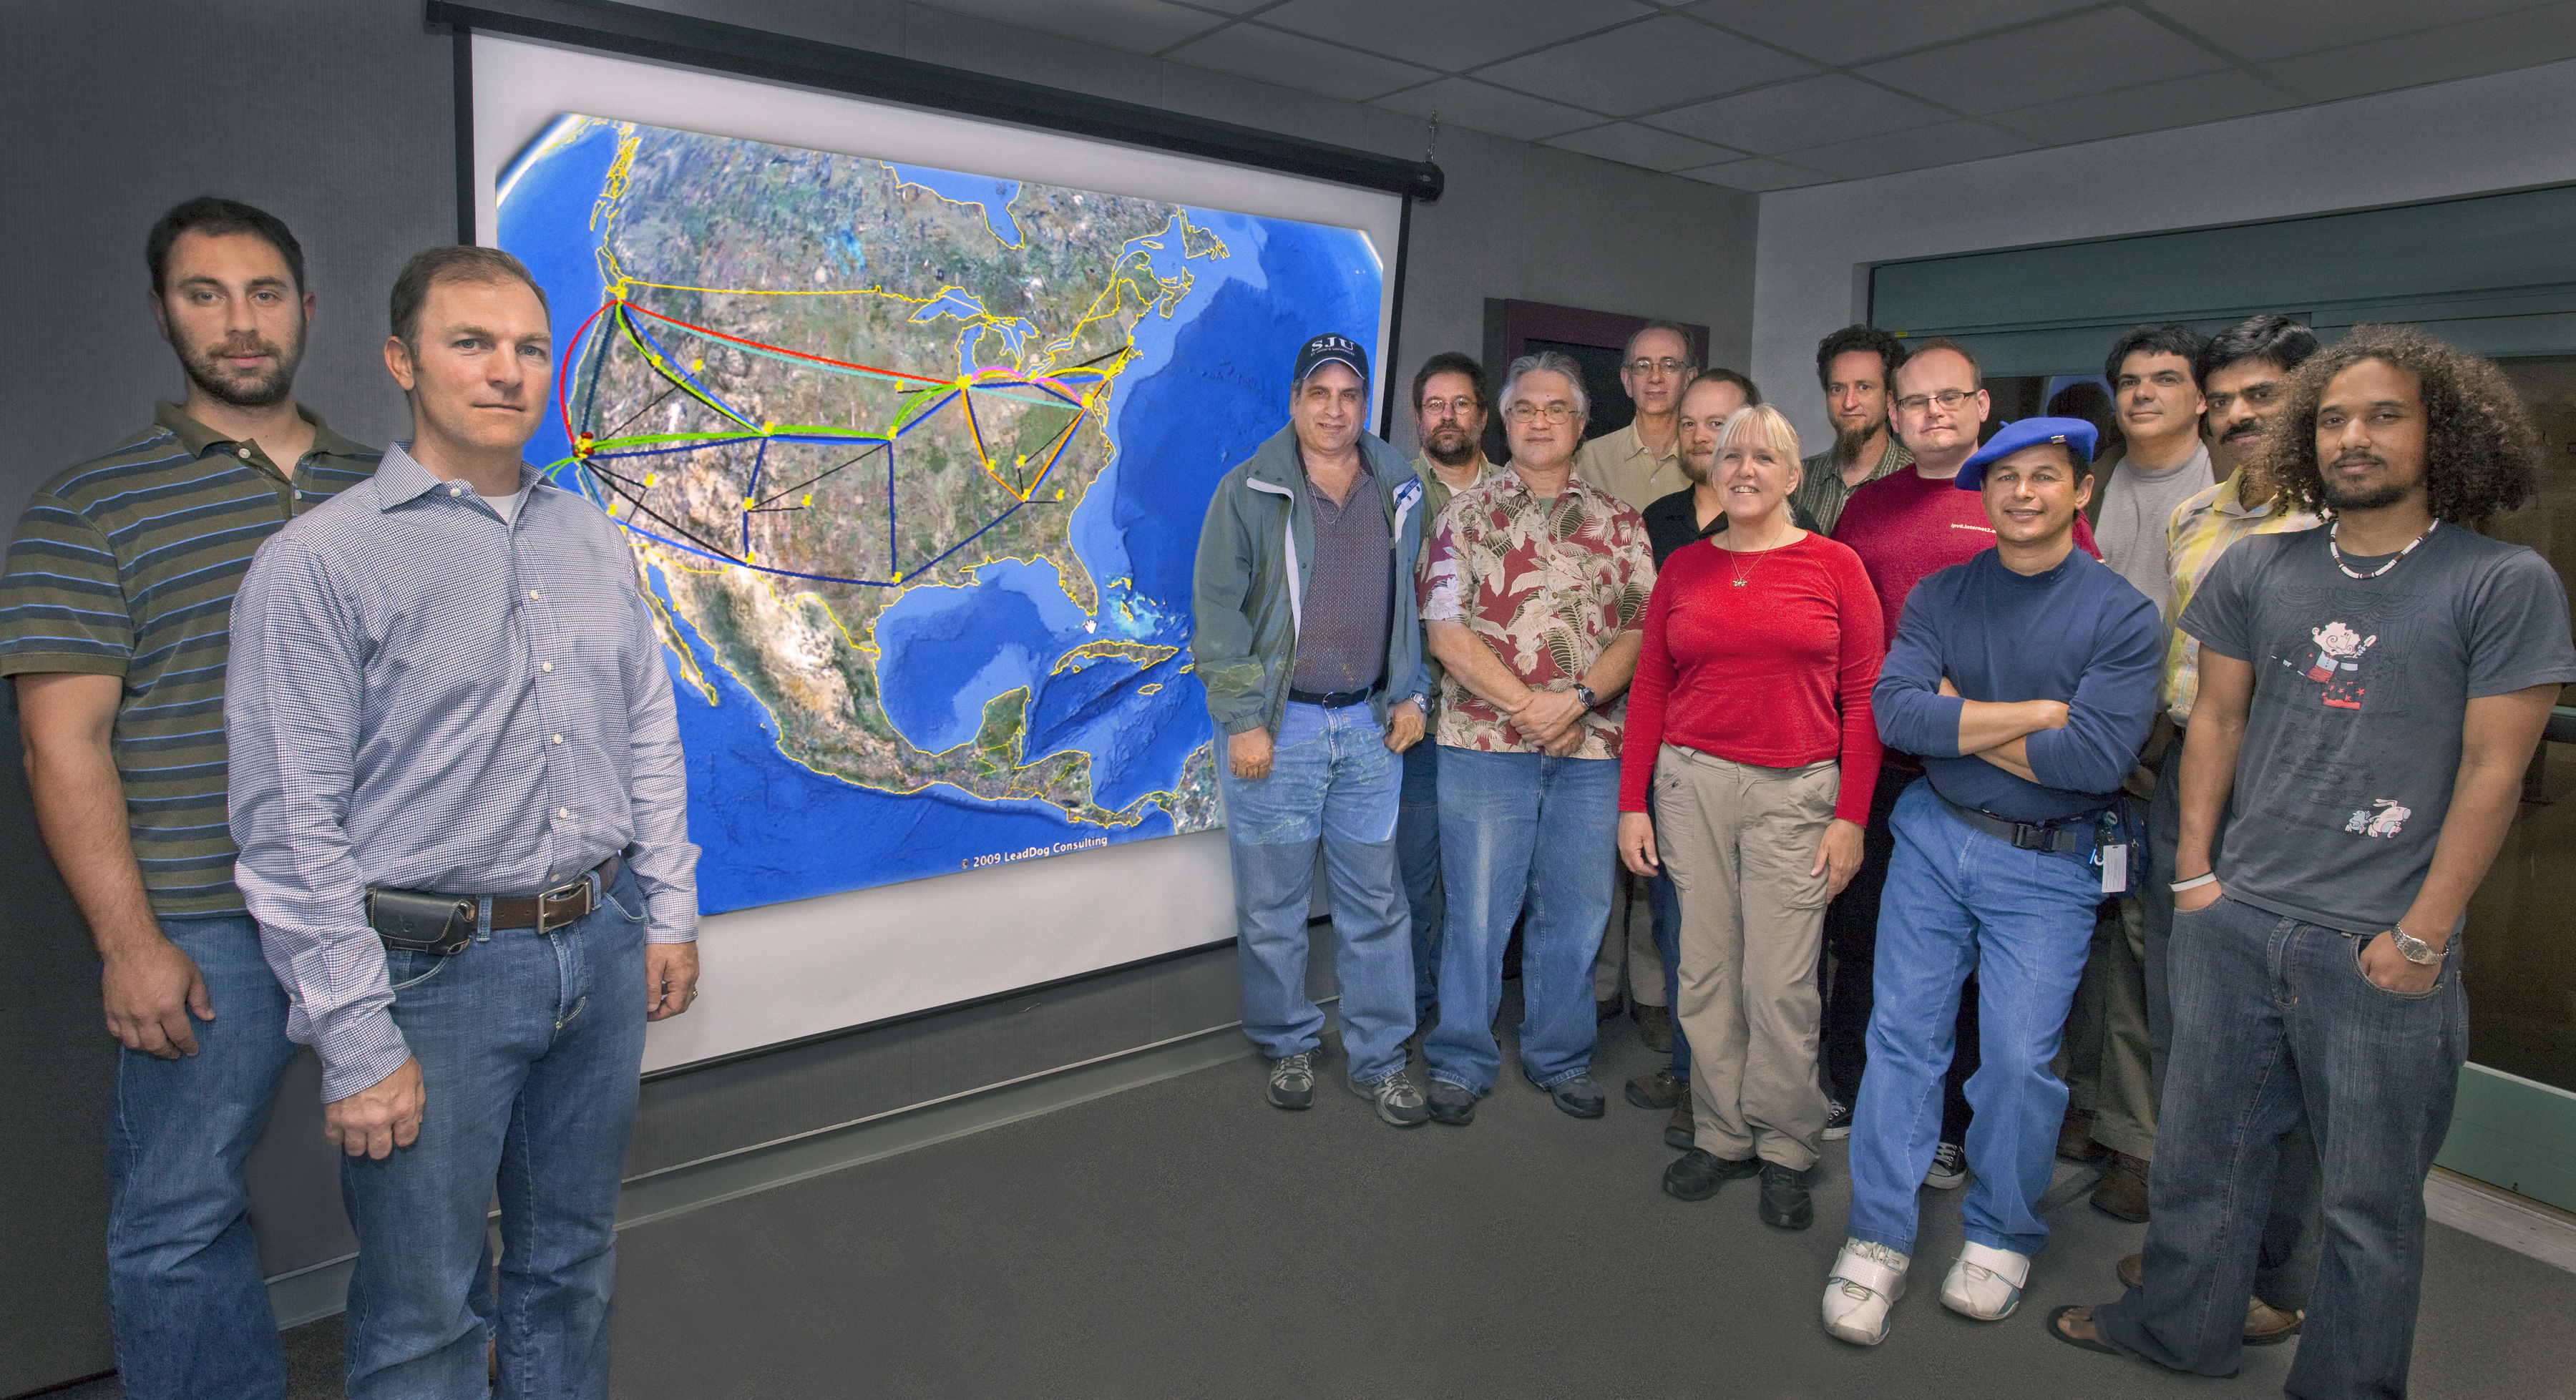 ESnet Department Head Steve Cotter (second from left), shown here with the ESnet team and a map of the high-performance computer network they manage, will oversee development of a prototype 100 Gbps network.